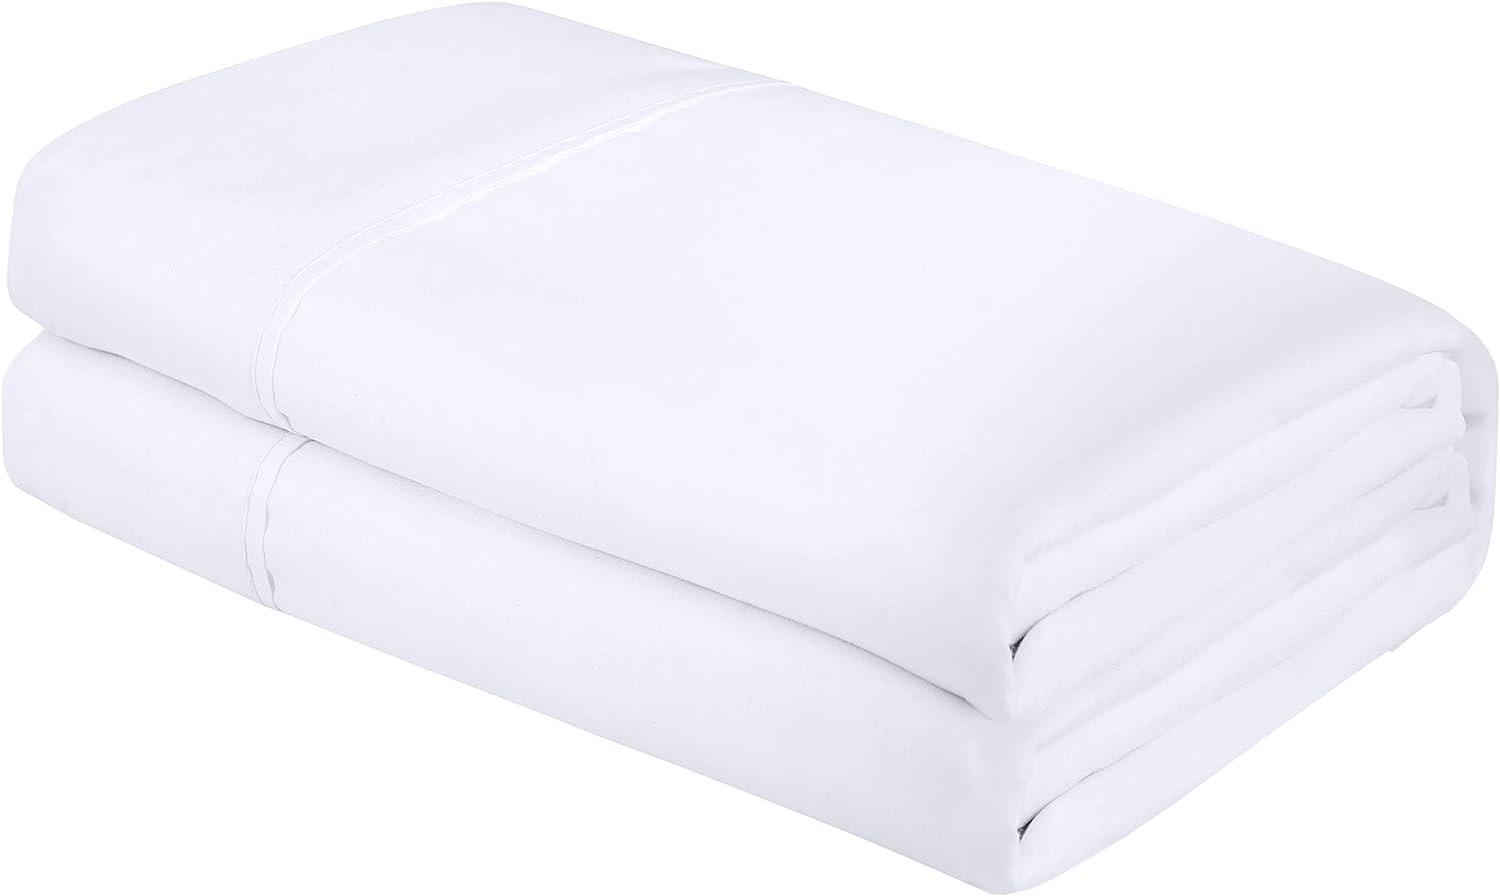 Royale Linens King Flat Sheet Only - Brushed 1800 Microfiber - Ultra Soft & Breathable - Wrinkle & Stain Resistant - Hotel Quality Flat Sheet Sold Separately - Top Sheet for Bed - (King, White)